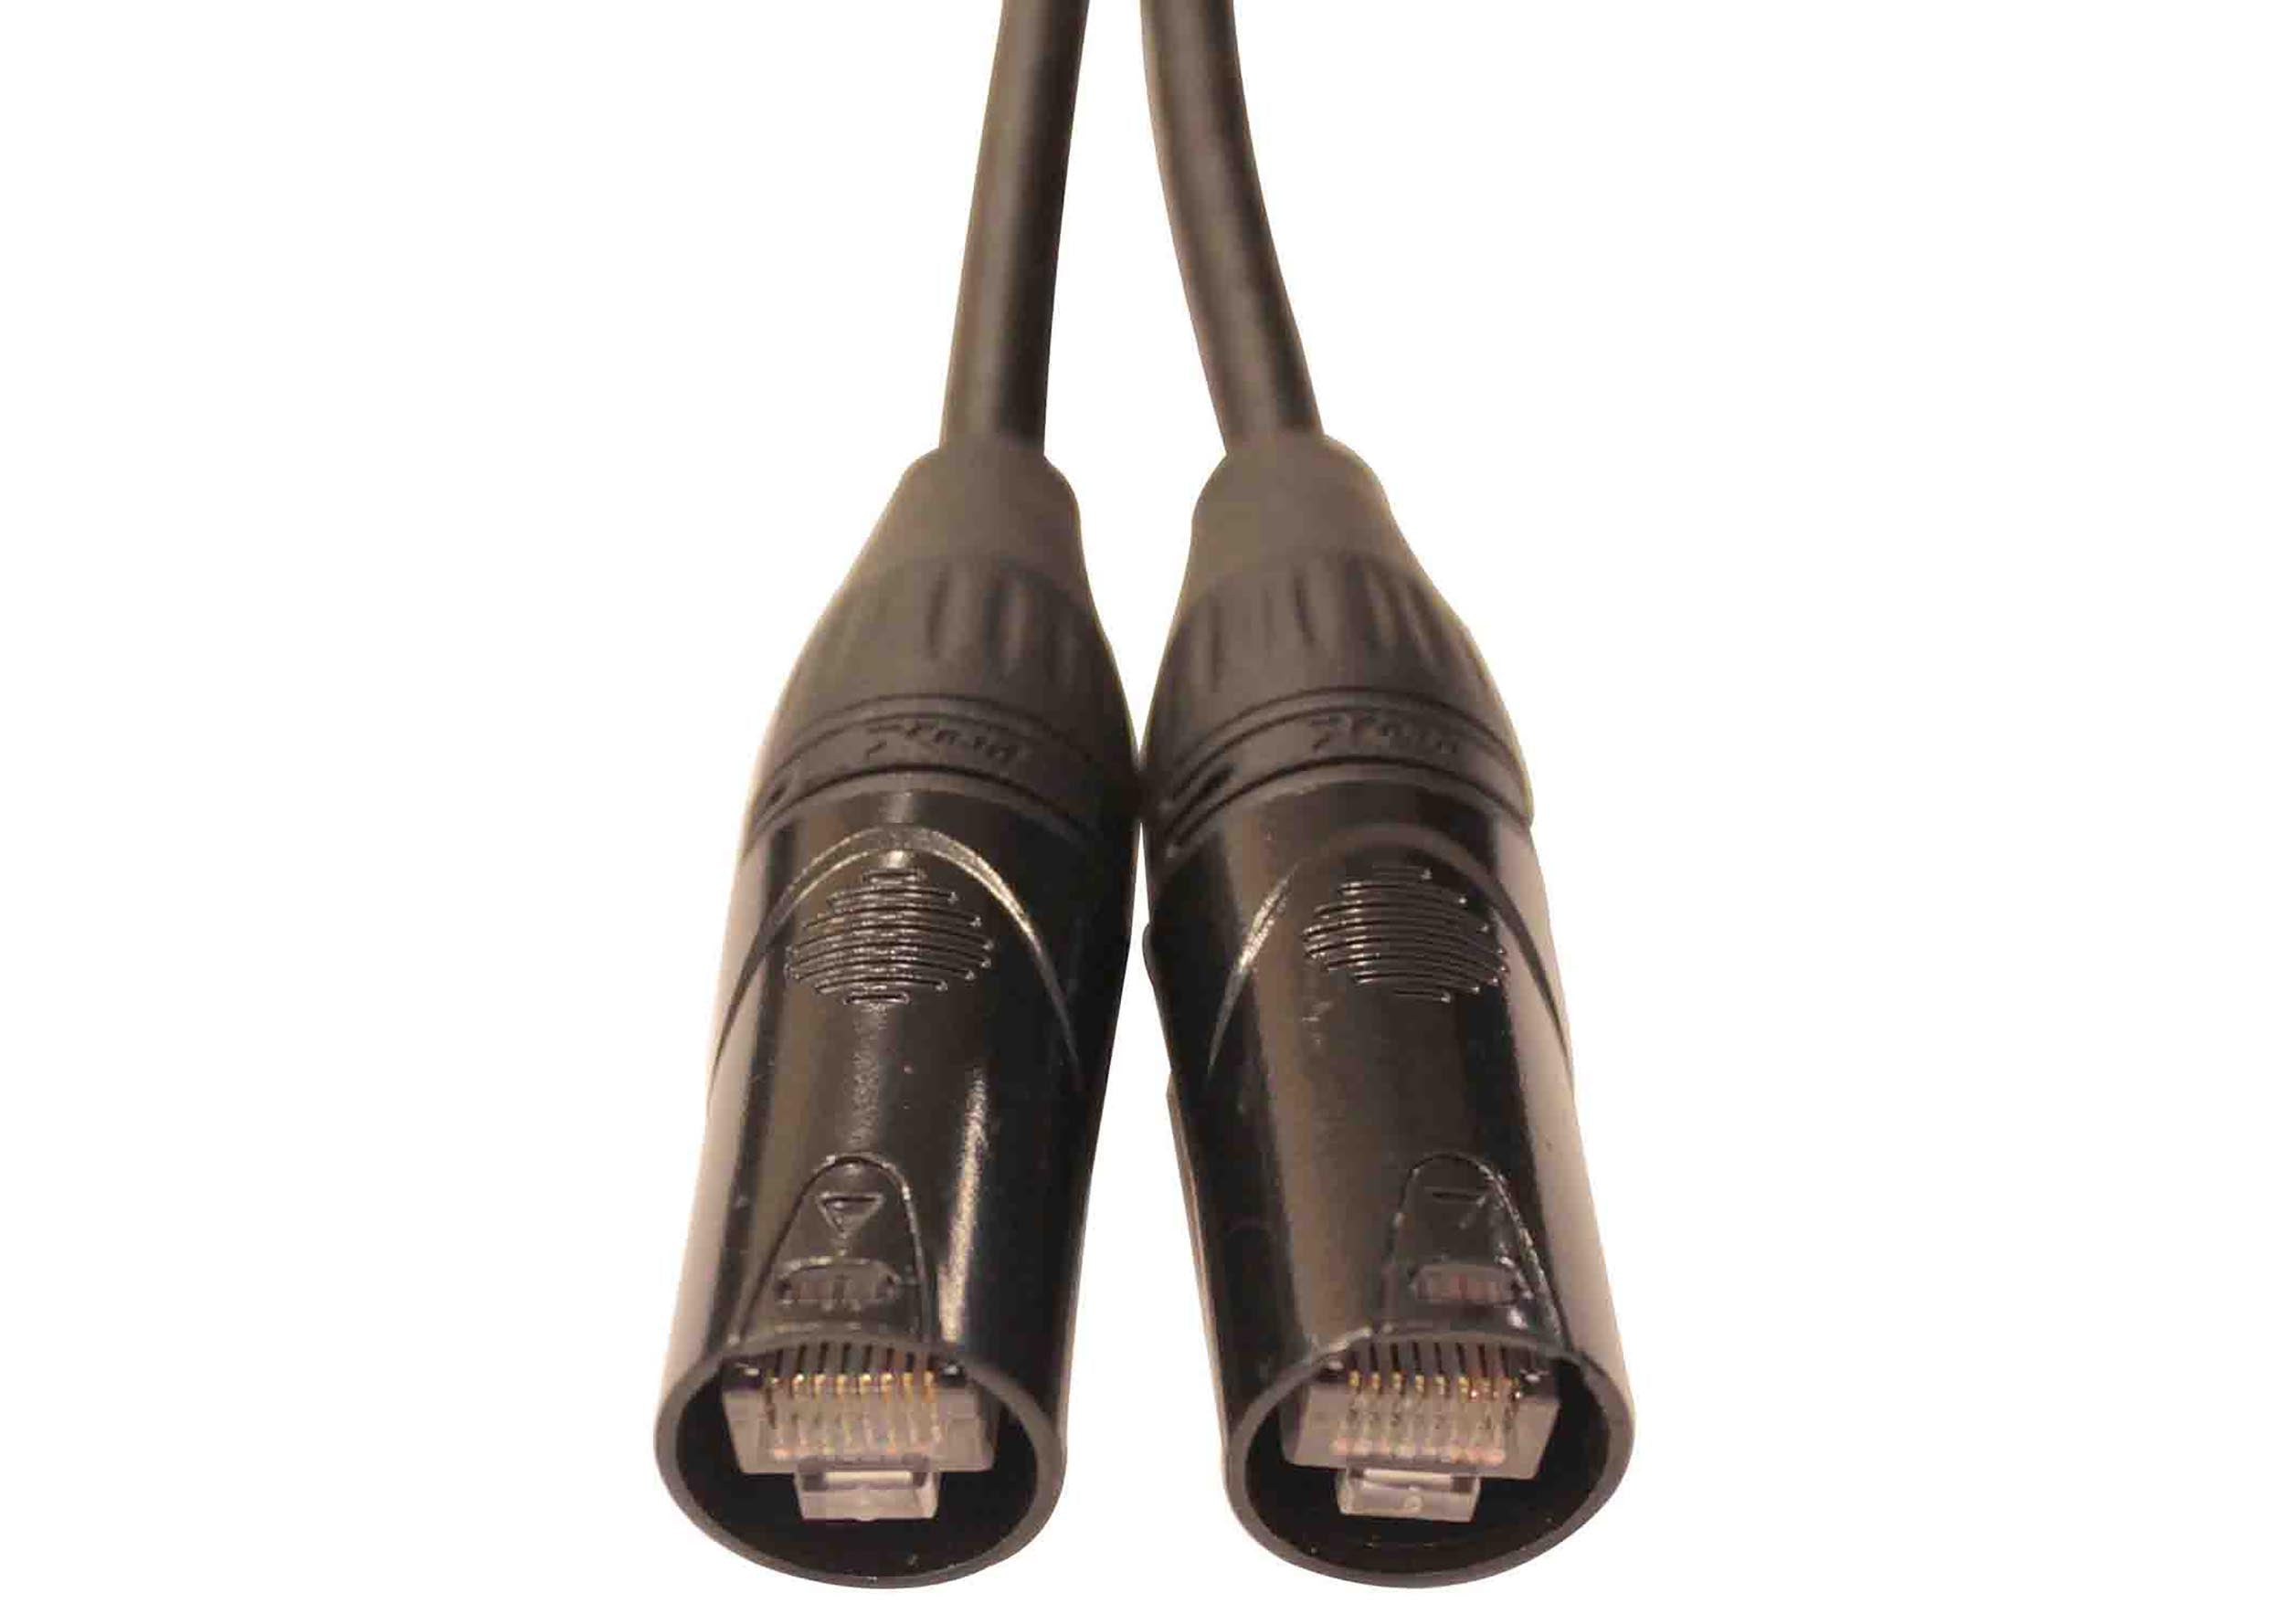 Prox XCCAT603 STP Cat 6 Cable W-RJ45 for Network and Snake Box Connections - 3 Feet by ProX Cases